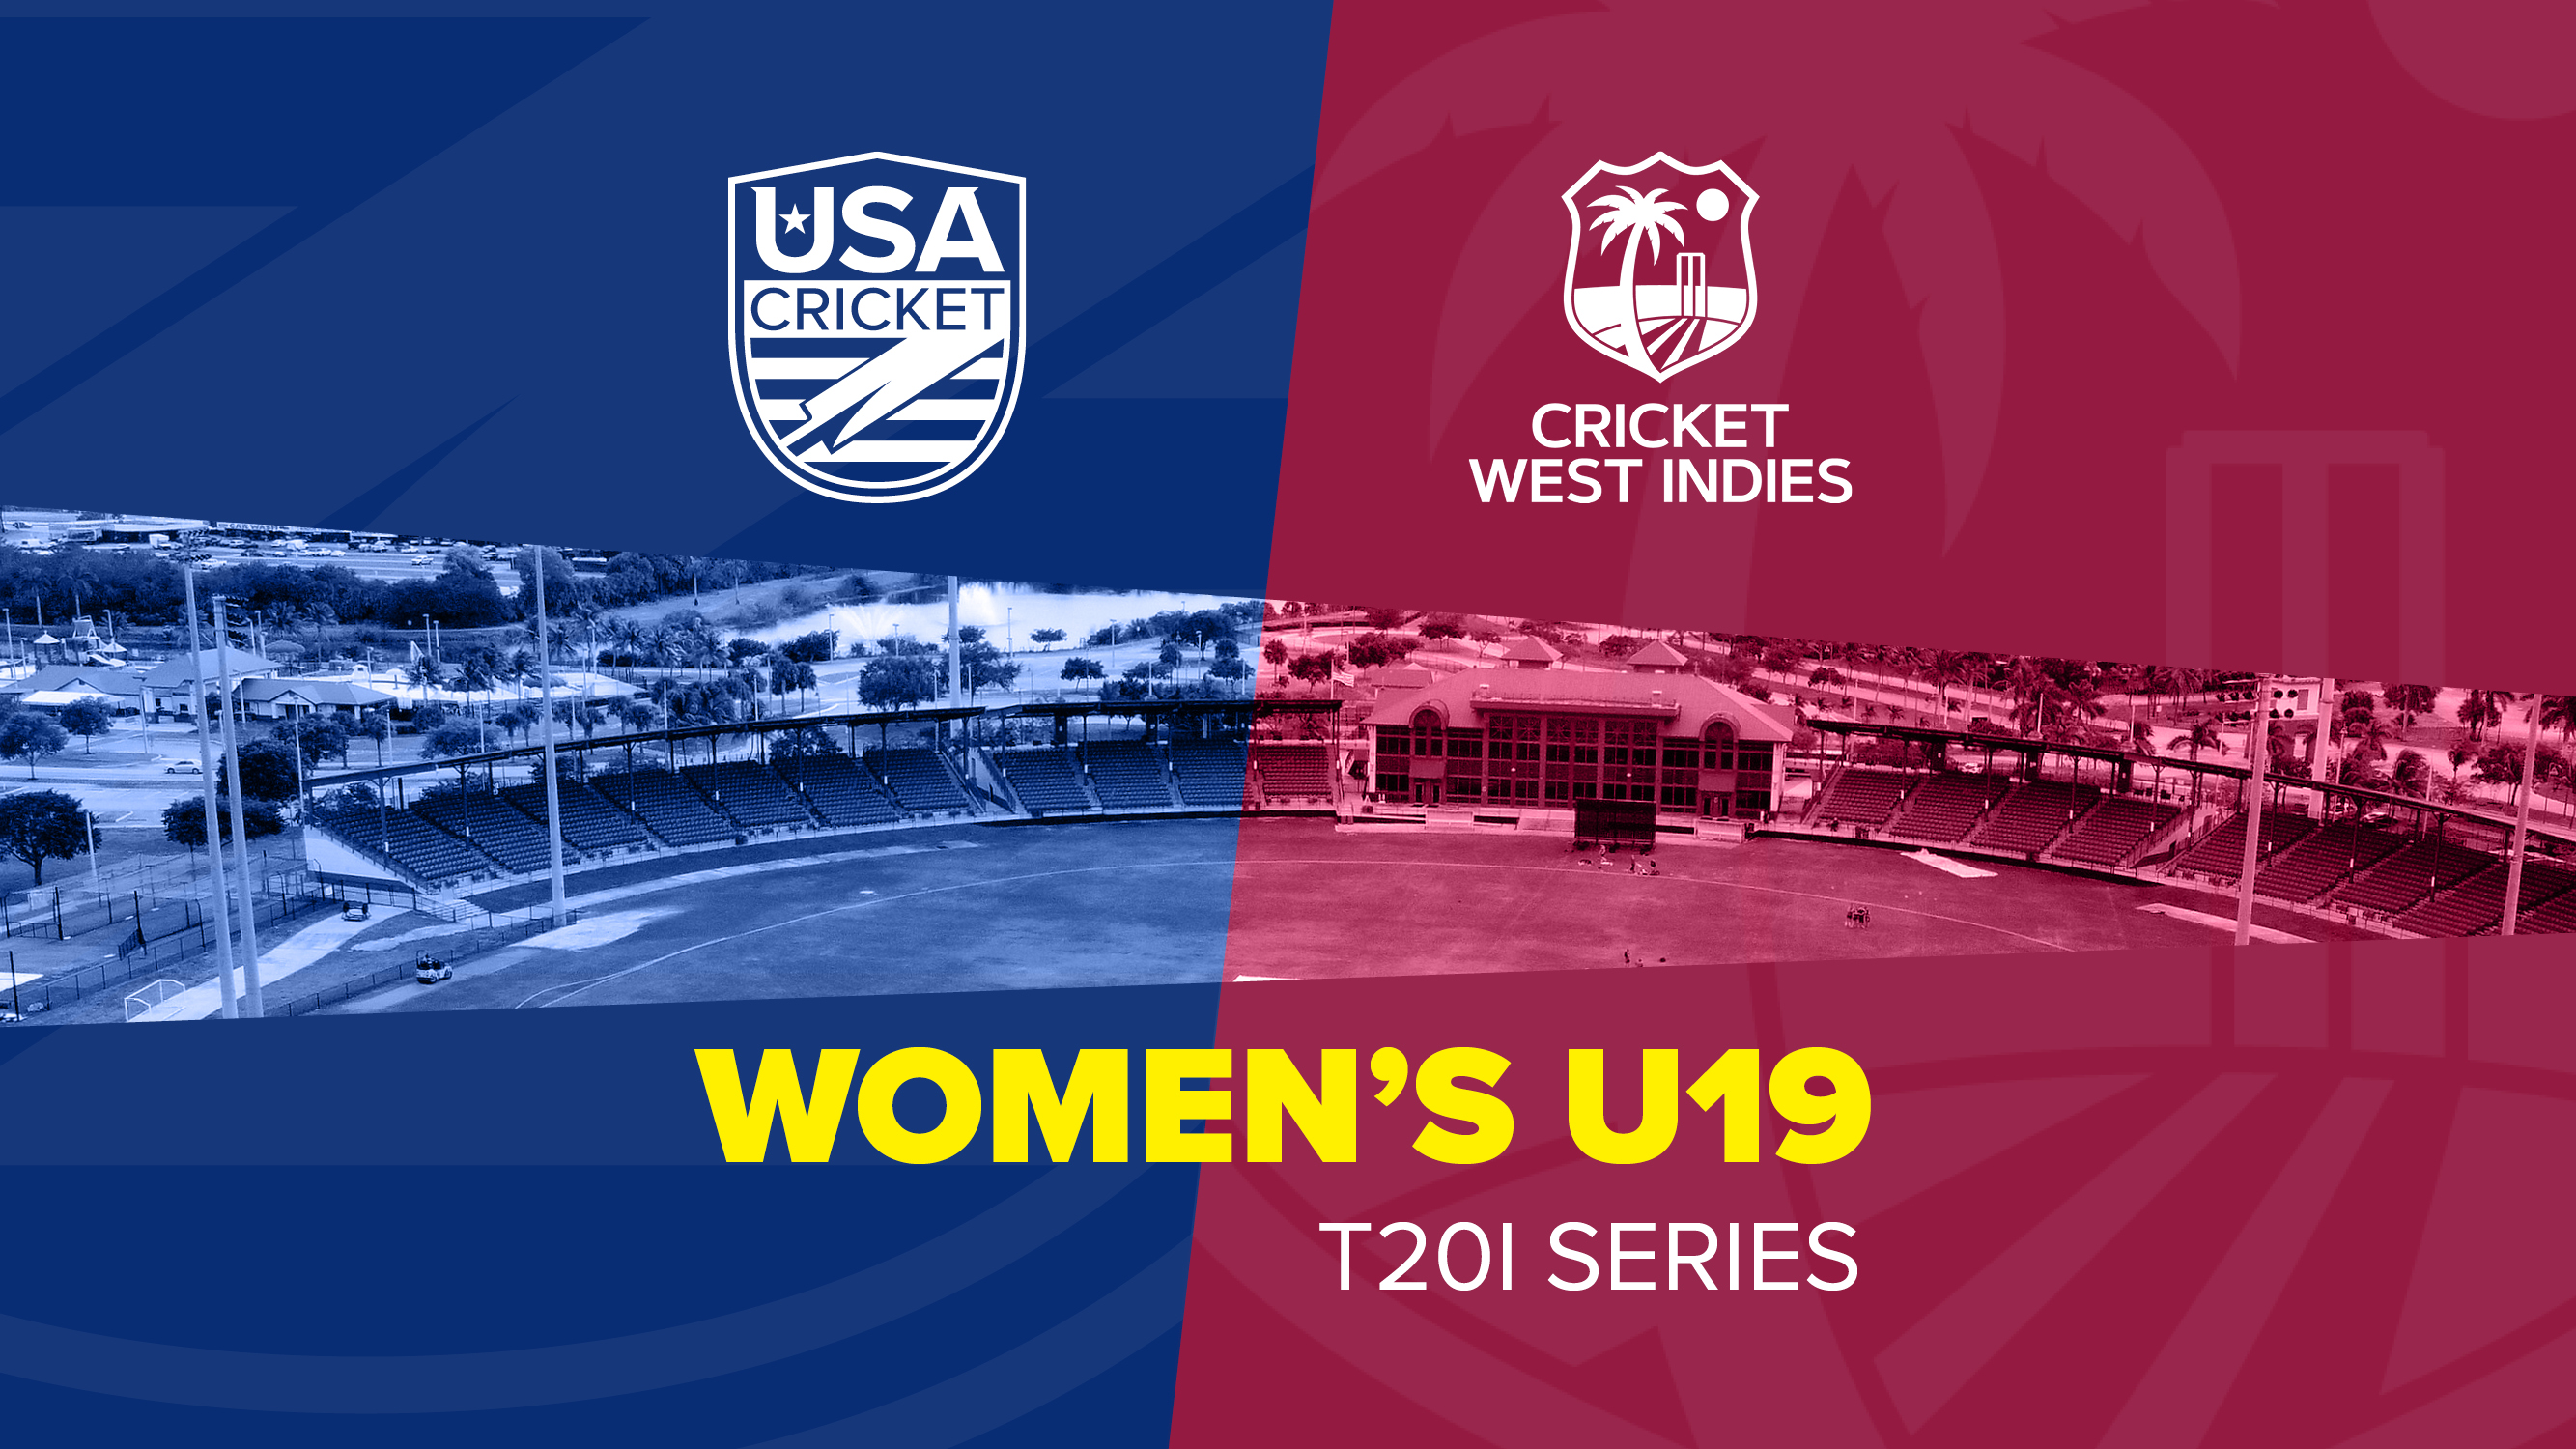 USA Cricket Unveils Event Partners for Historic Women’s U19 Series vs West Indies